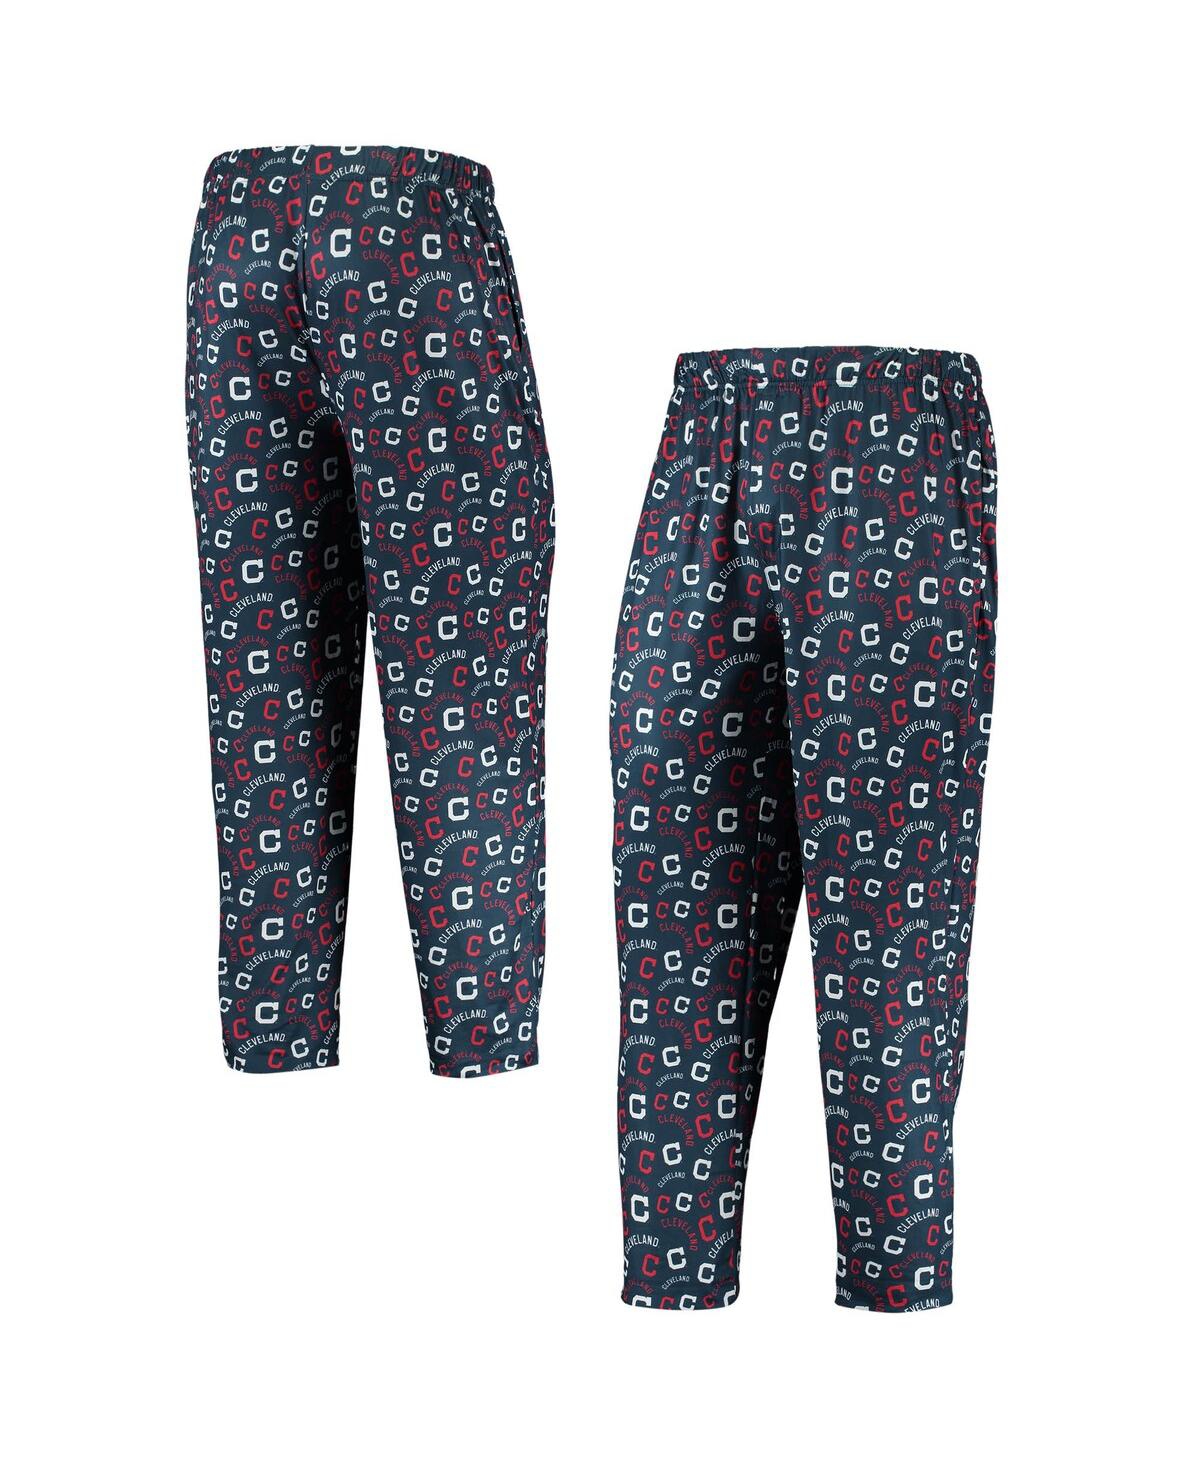 Men's Navy Cleveland Indians Cooperstown Collection Repeat Pajama Pants - Navy